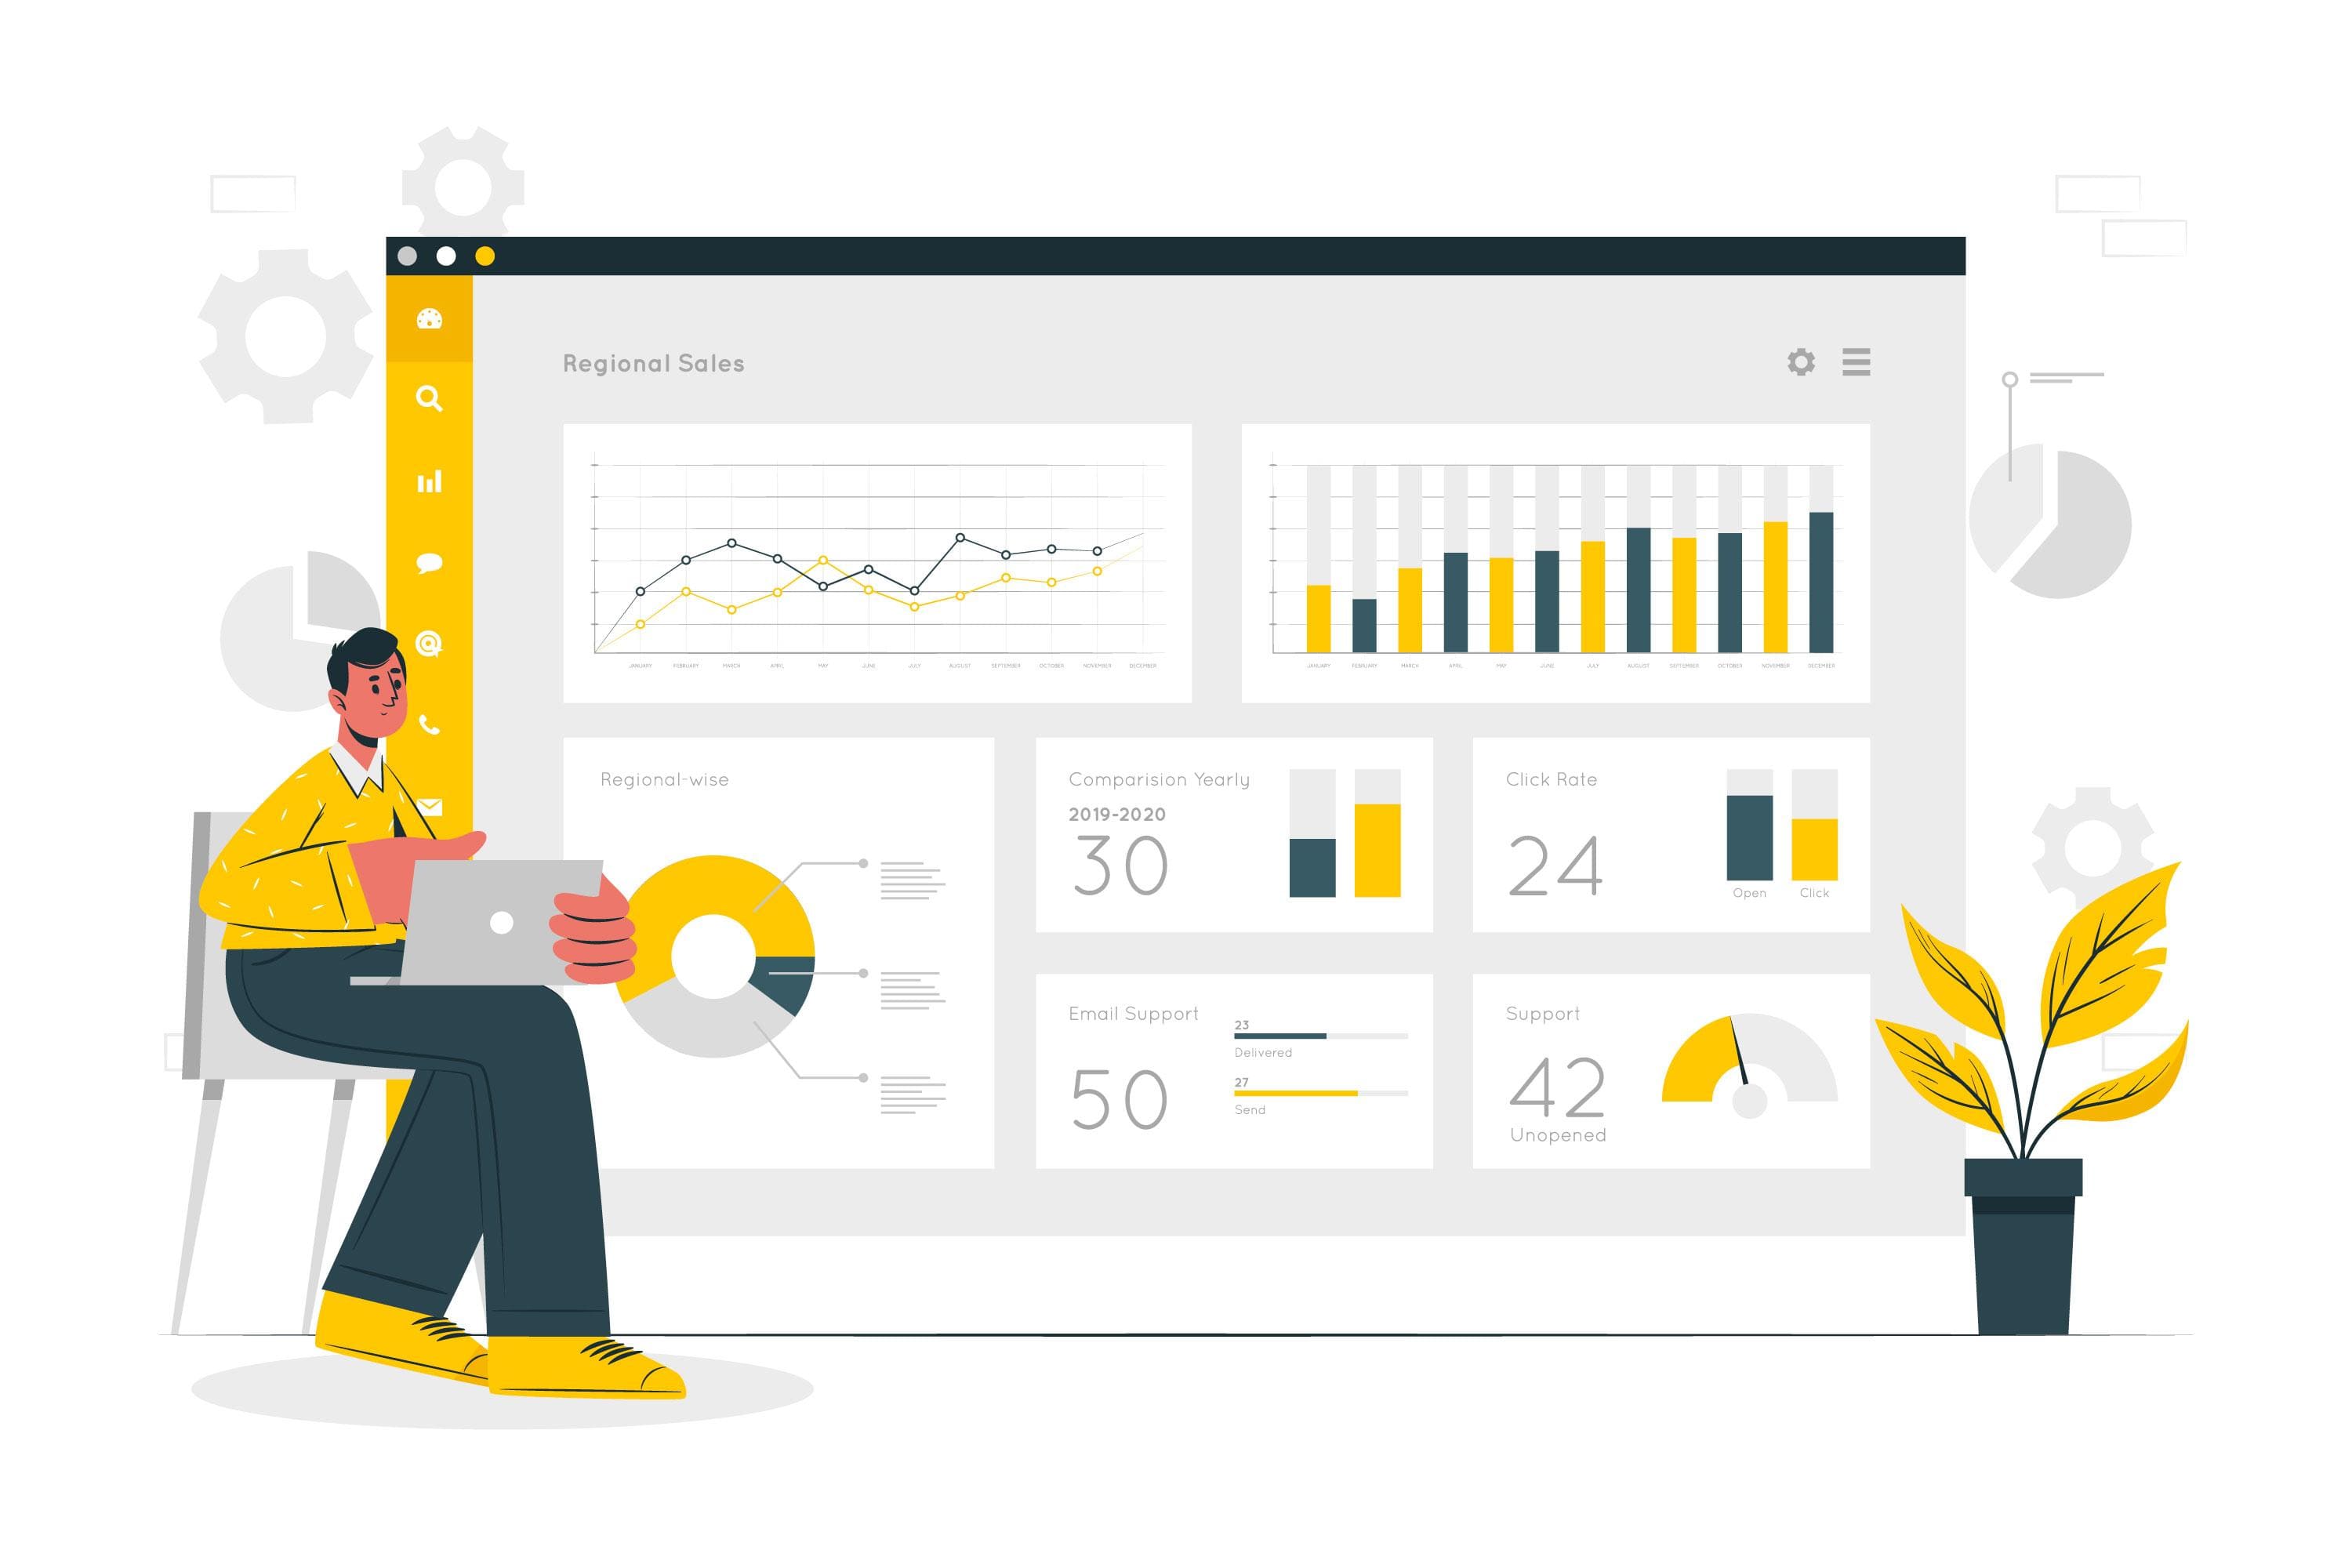 Project Dashboards